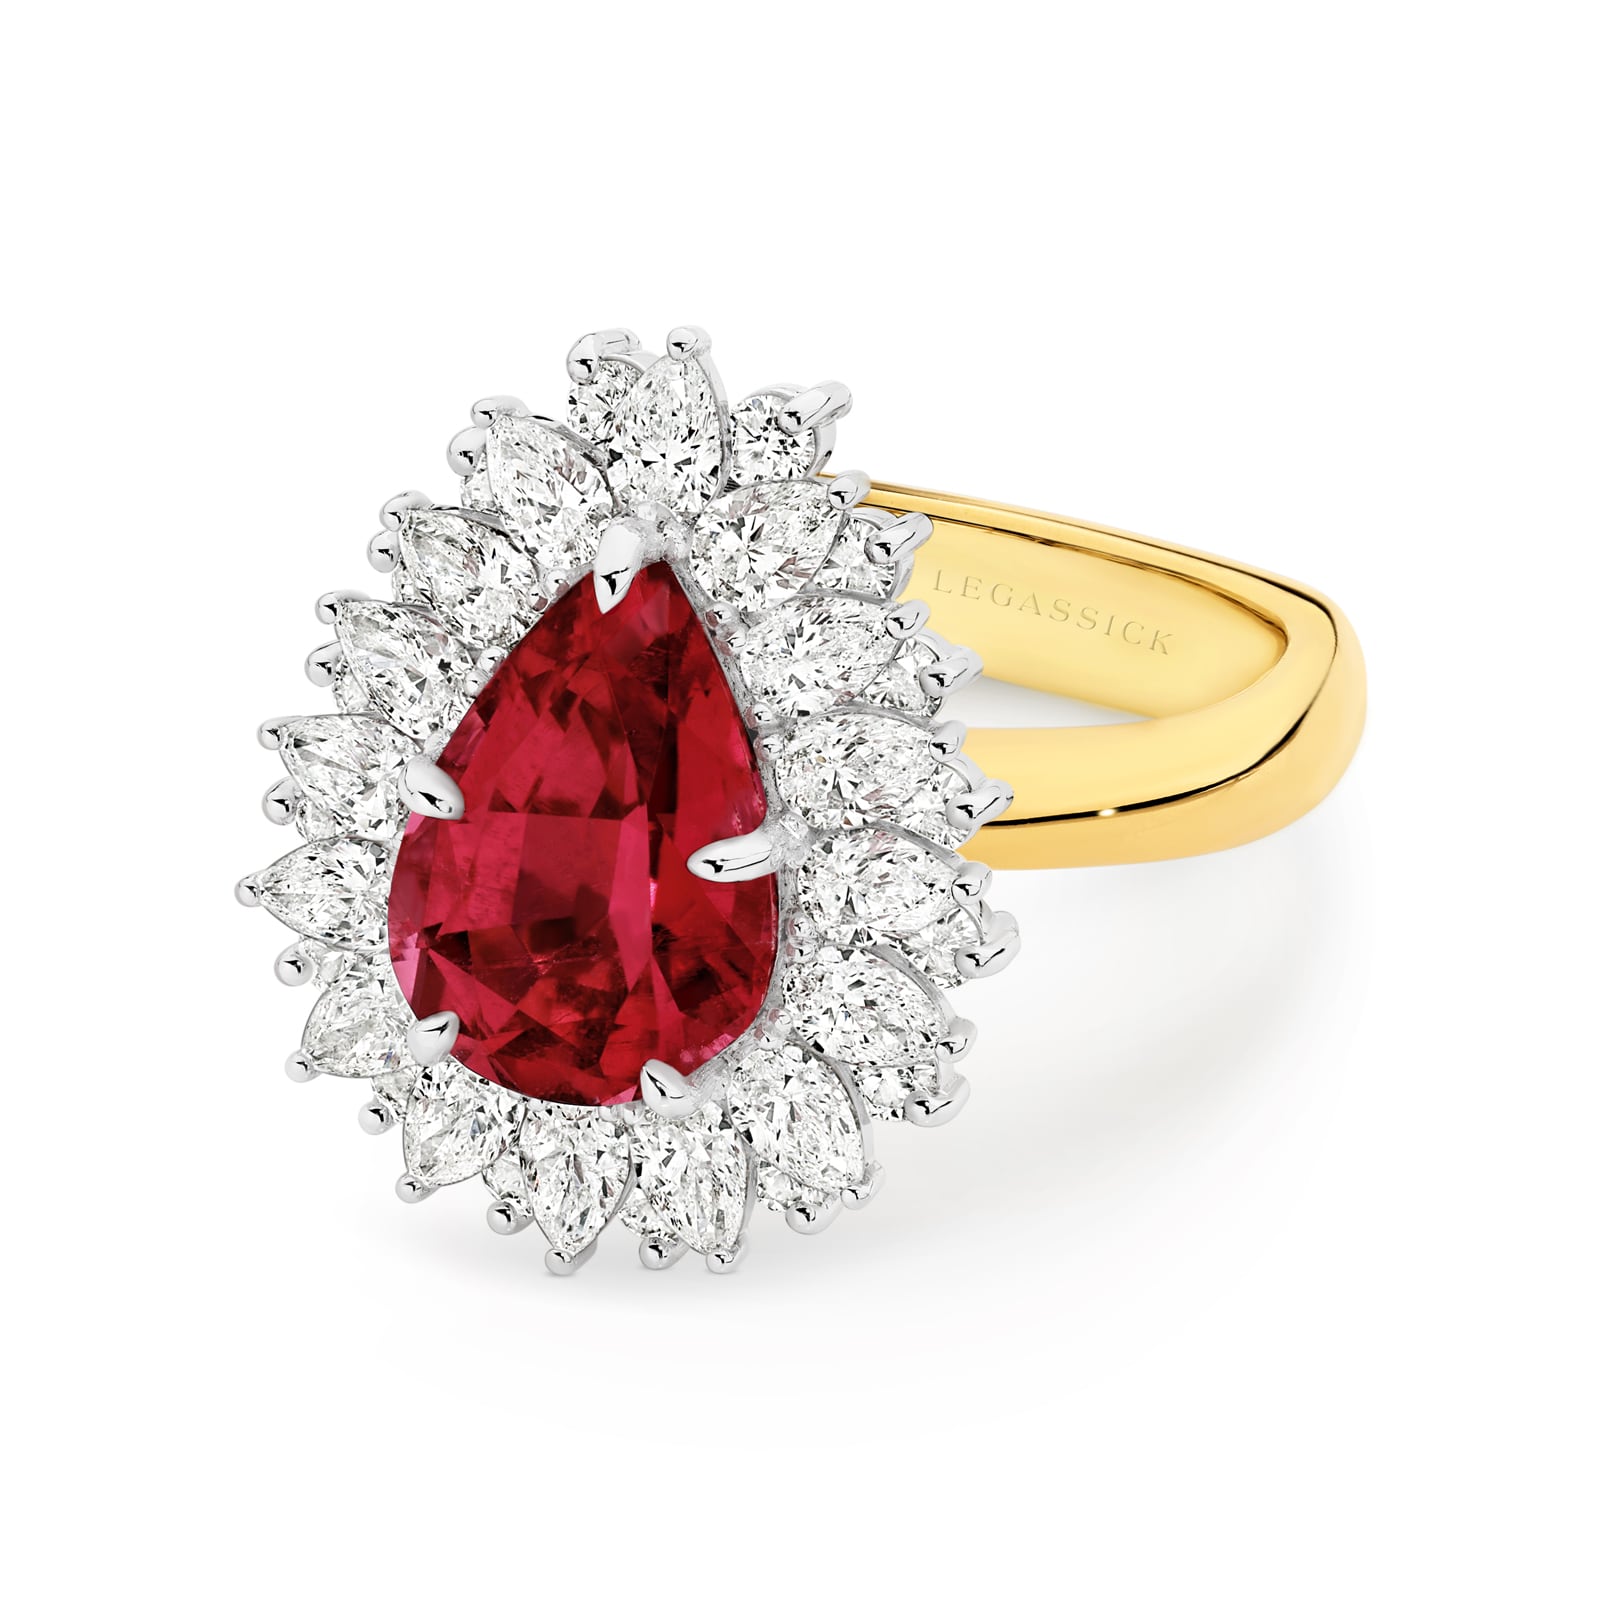 Josephine is a 3.60ct pear-cut Rubellite tourmaline ring embraced by an exquisitely handcrafted pear cut and round brilliant cut diamond halo, set in white and yellow gold. She was designed and handcrafted by LeGassick's Master Jewellers, Gold Coast, Australia.